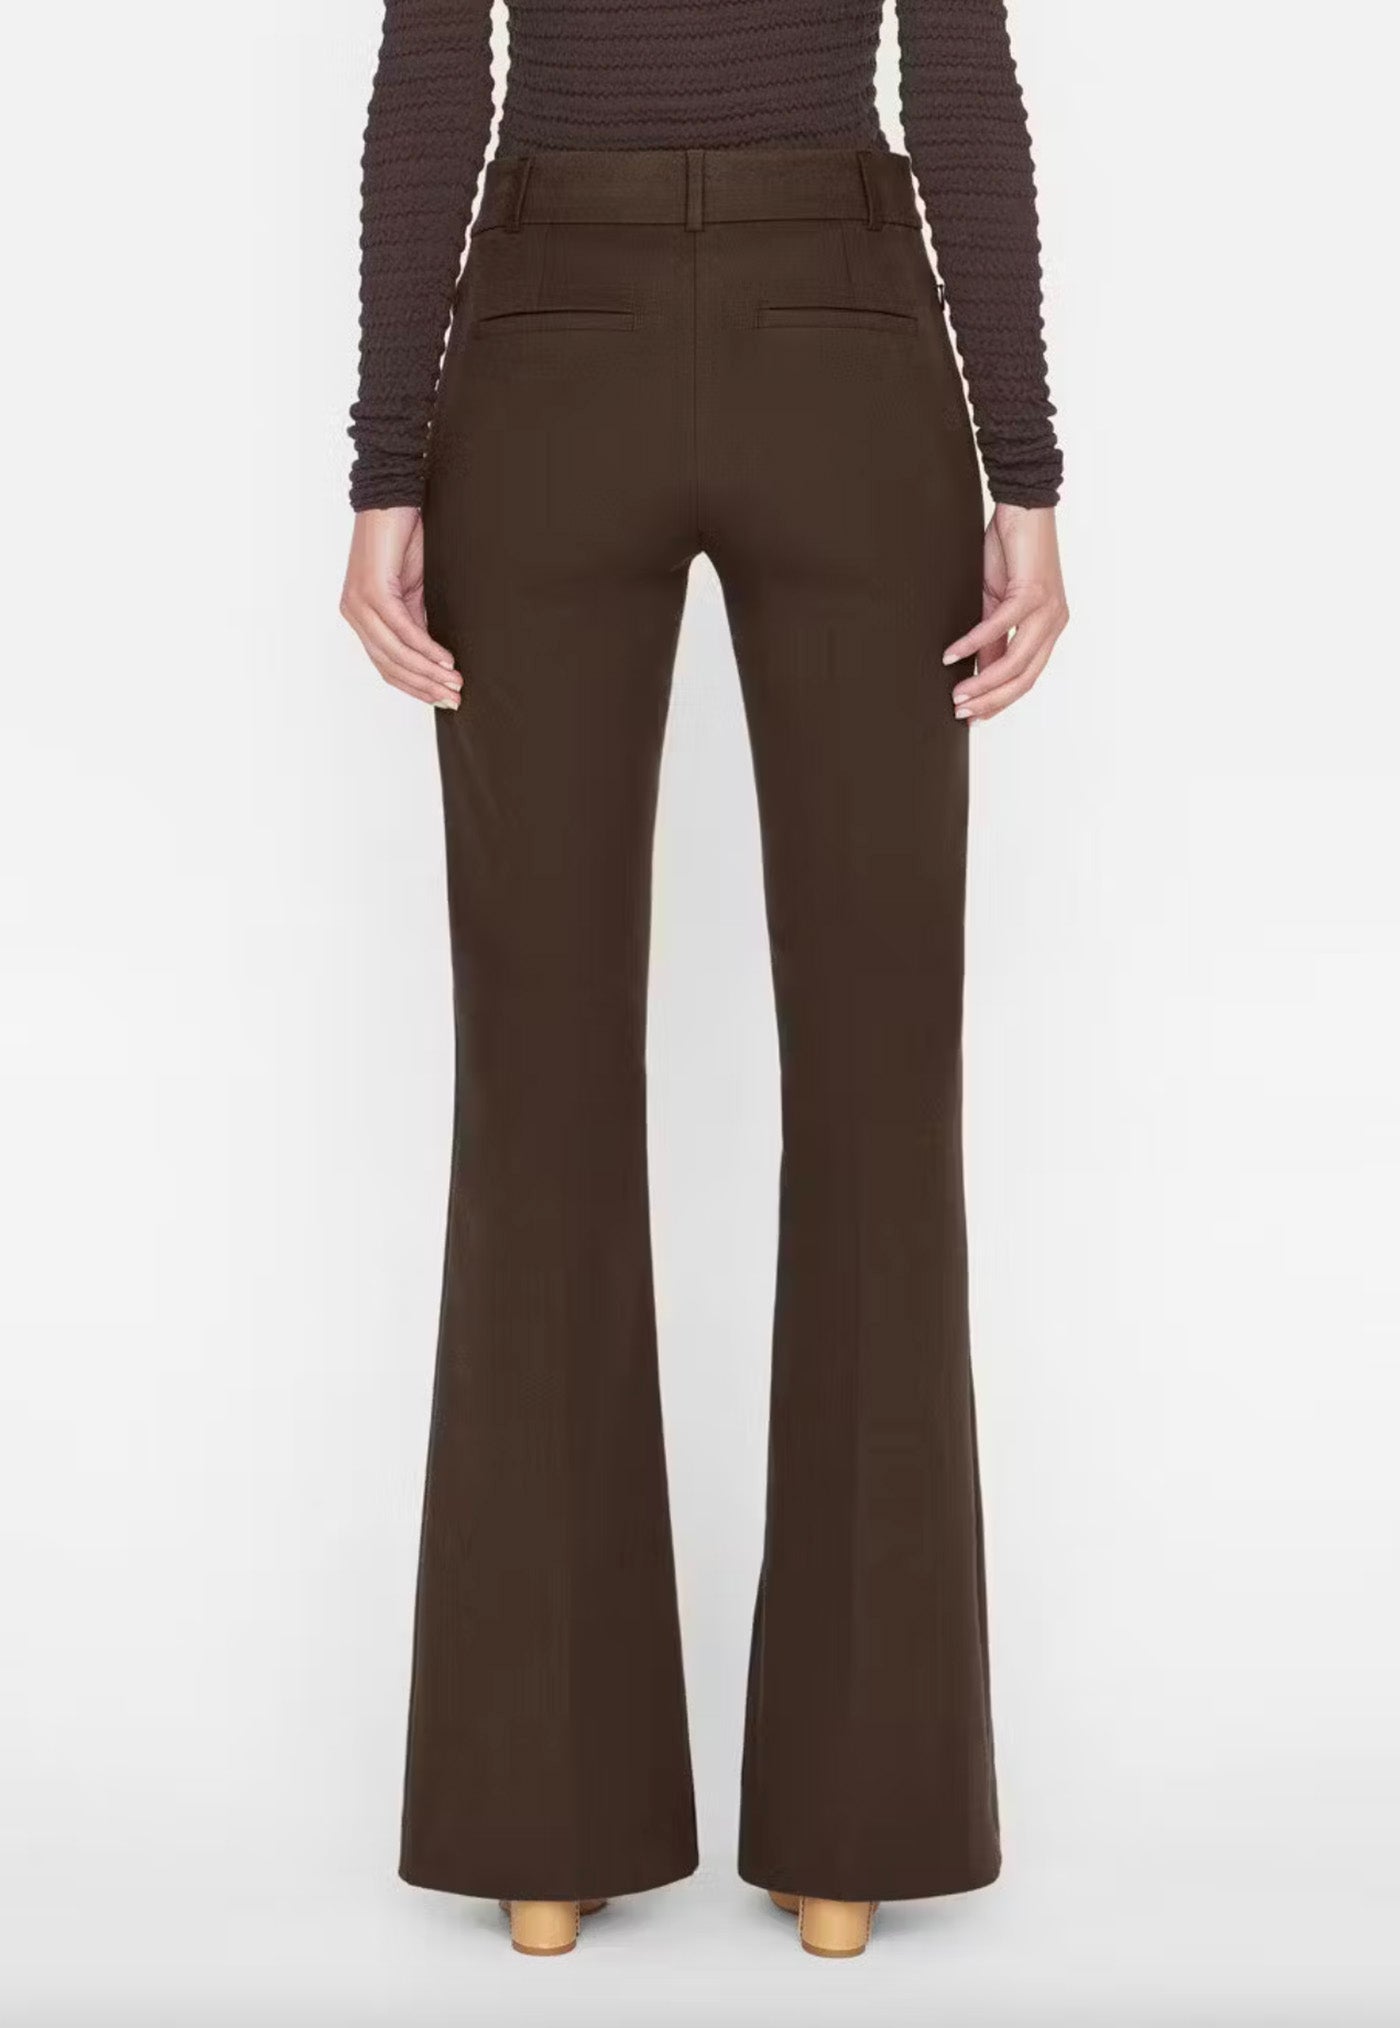 Le High Flare Split Front Trouser - Espresso sold by Angel Divine